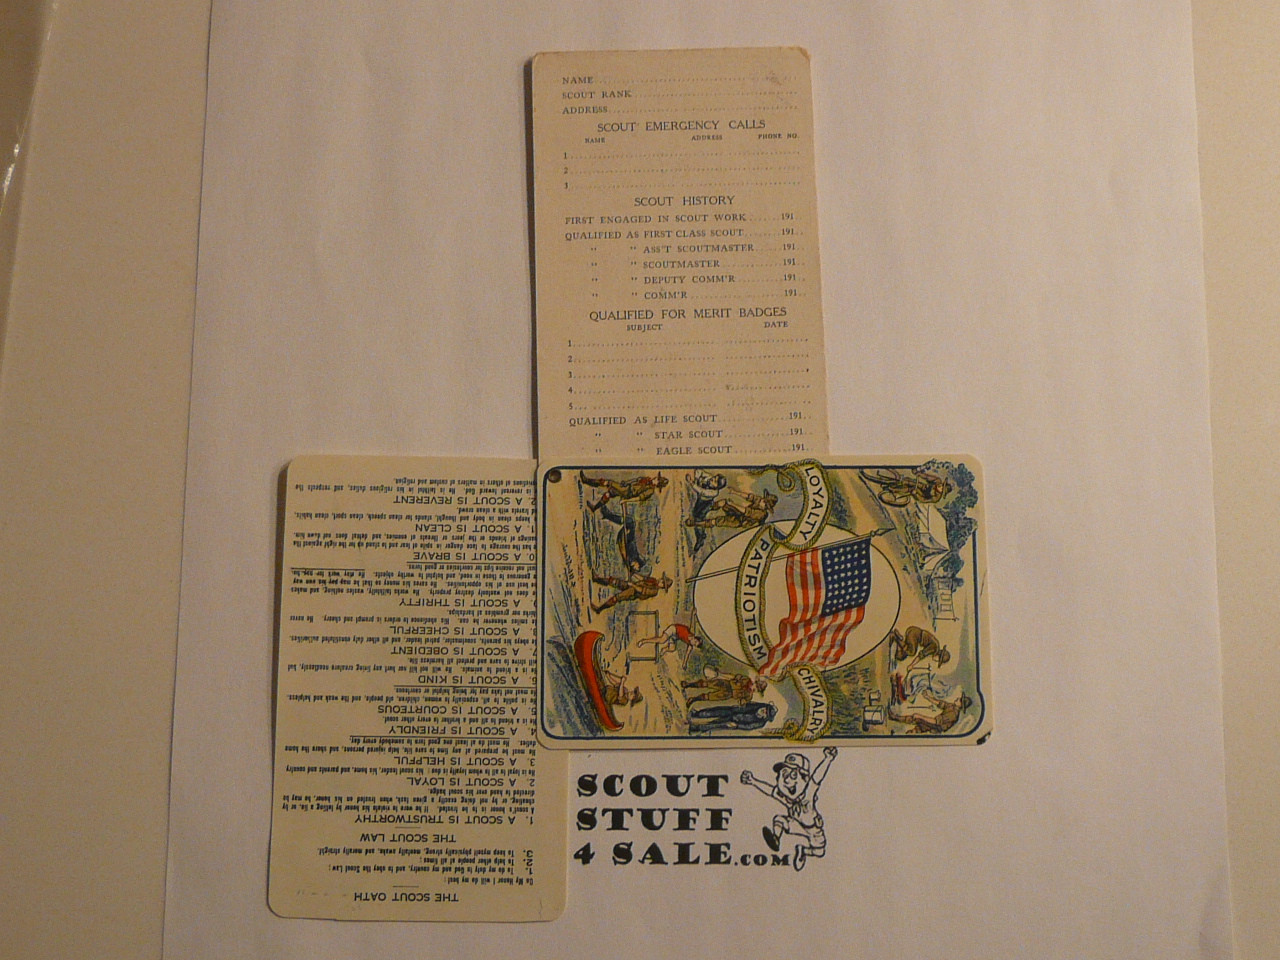 1919 Boy Scout SCOUTMASTER Celluloid Membership Card, 6 signatures, expires July 1919, 1919-1 variety, BSMC230